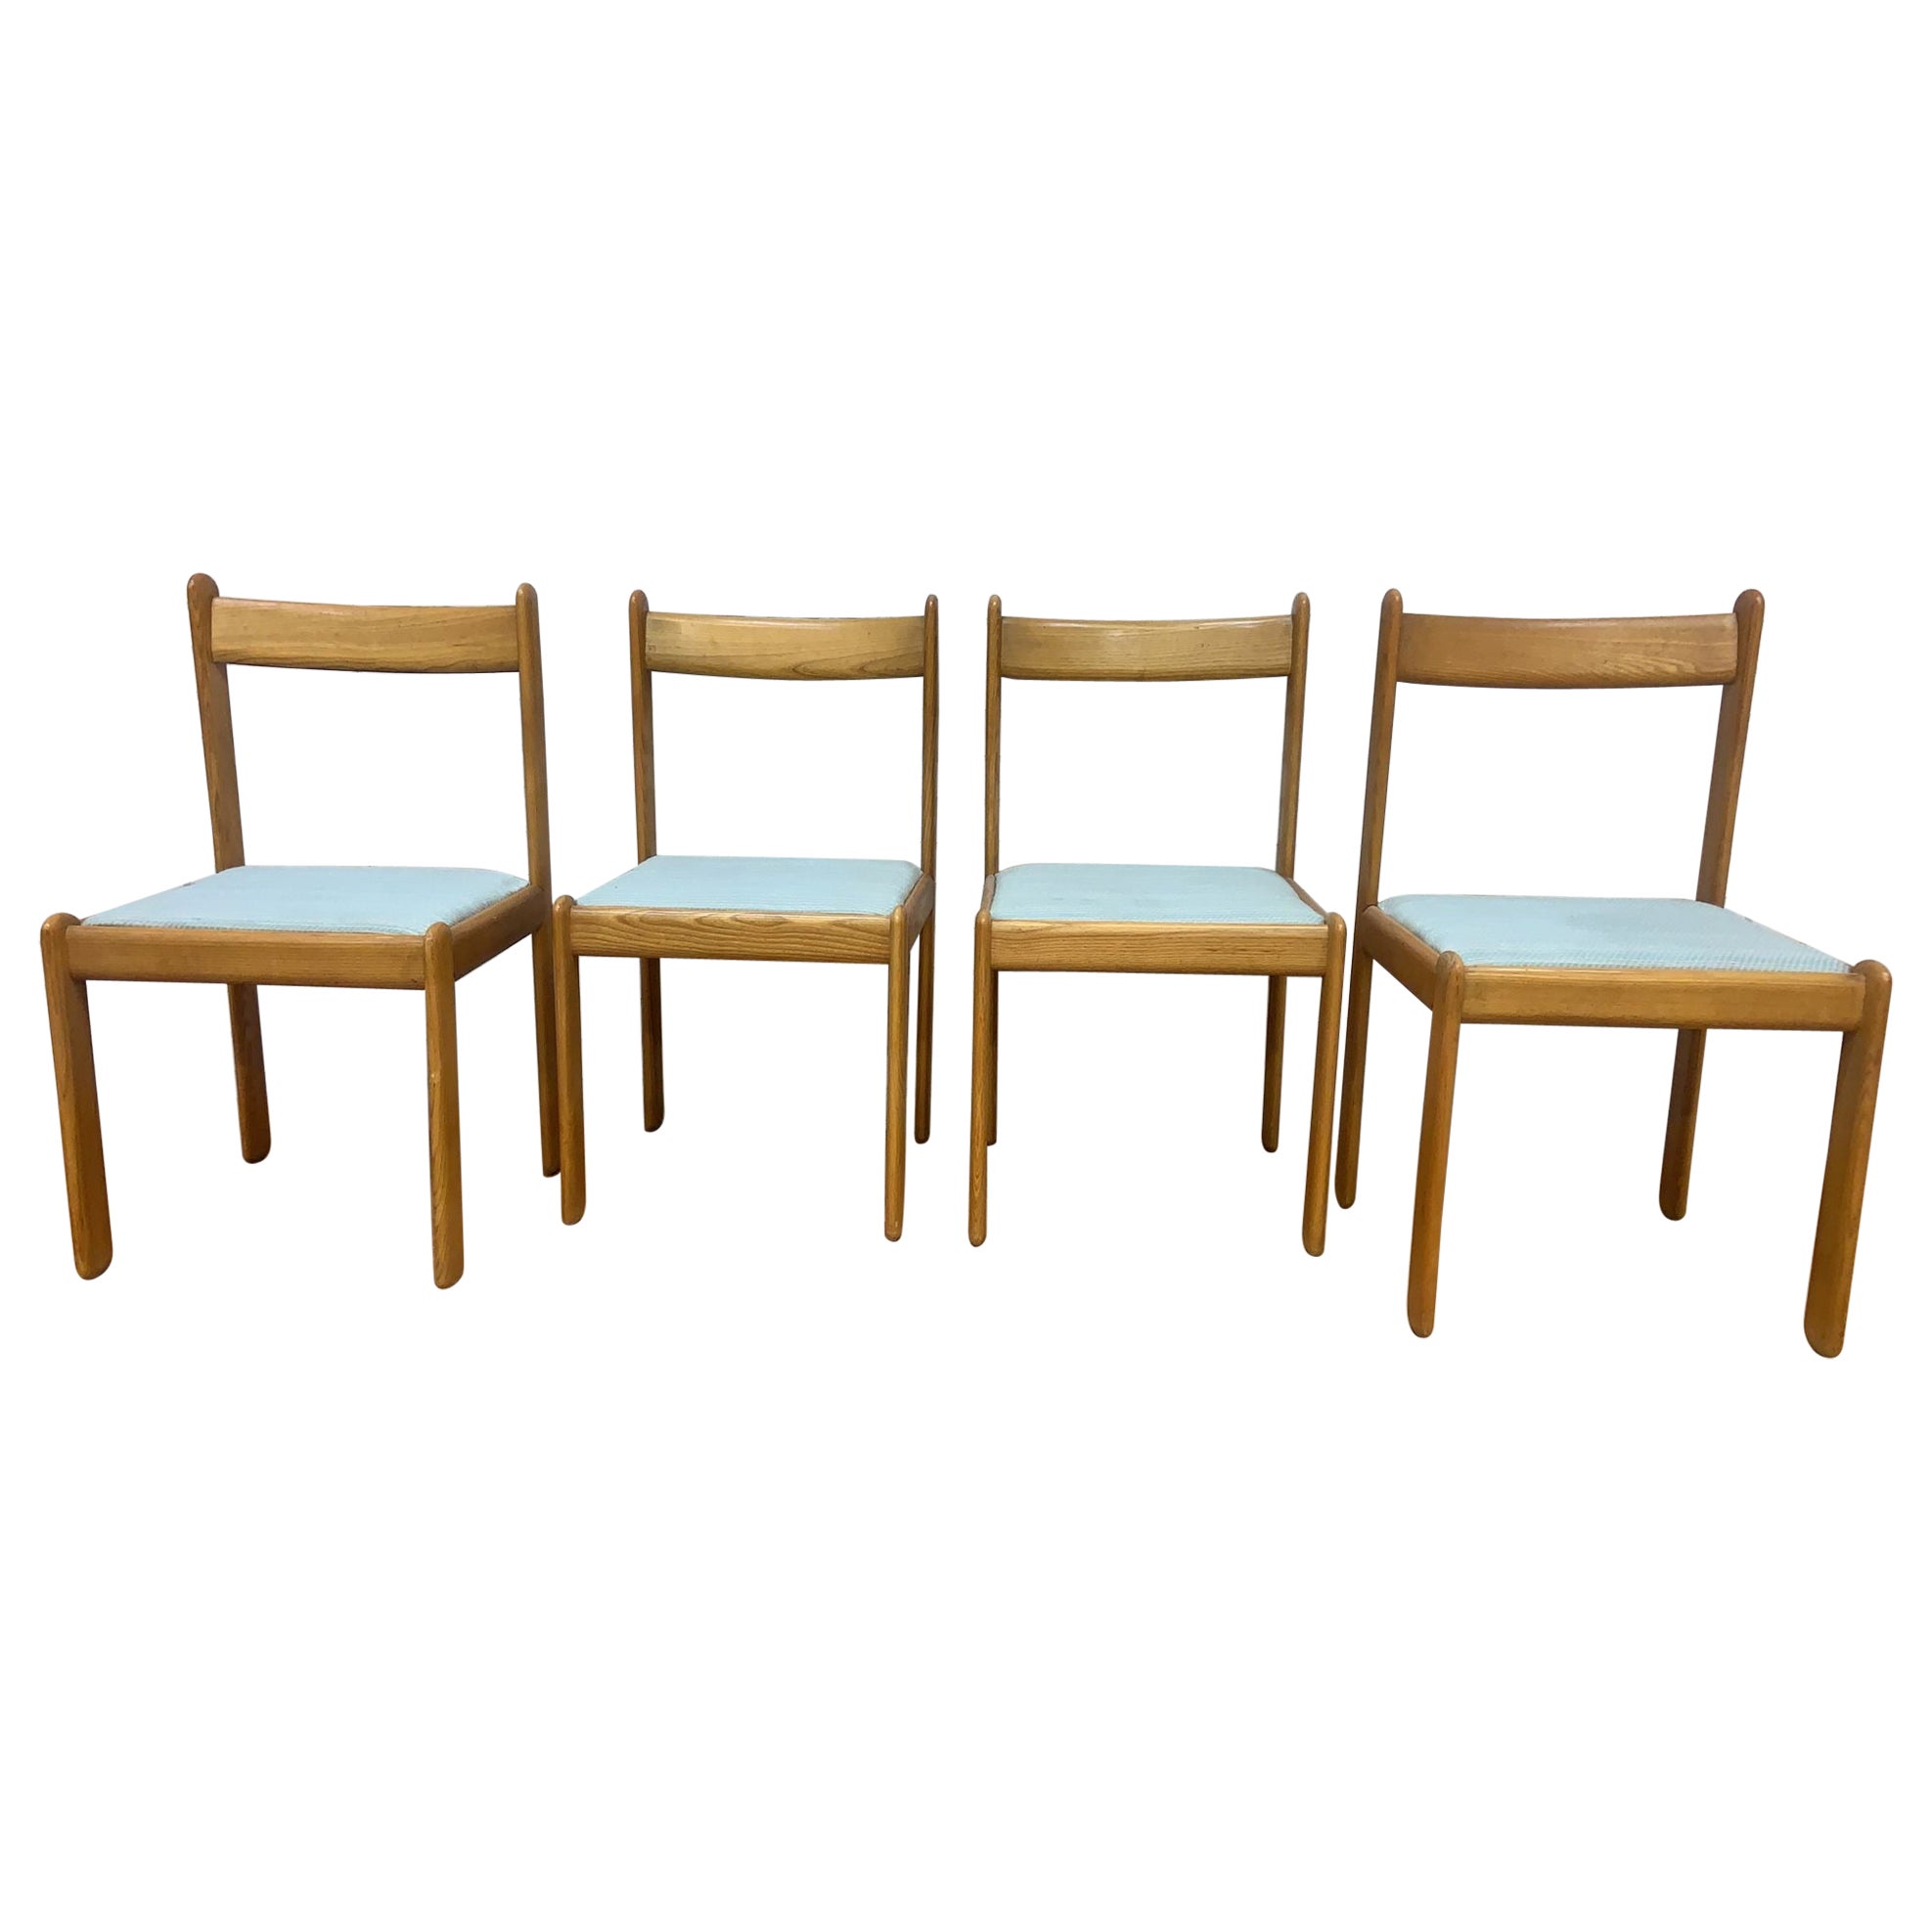 Vintage Italian Modern Vico Magistretti Style Blonde Beech Wood Chairs -Set of 4 For Sale